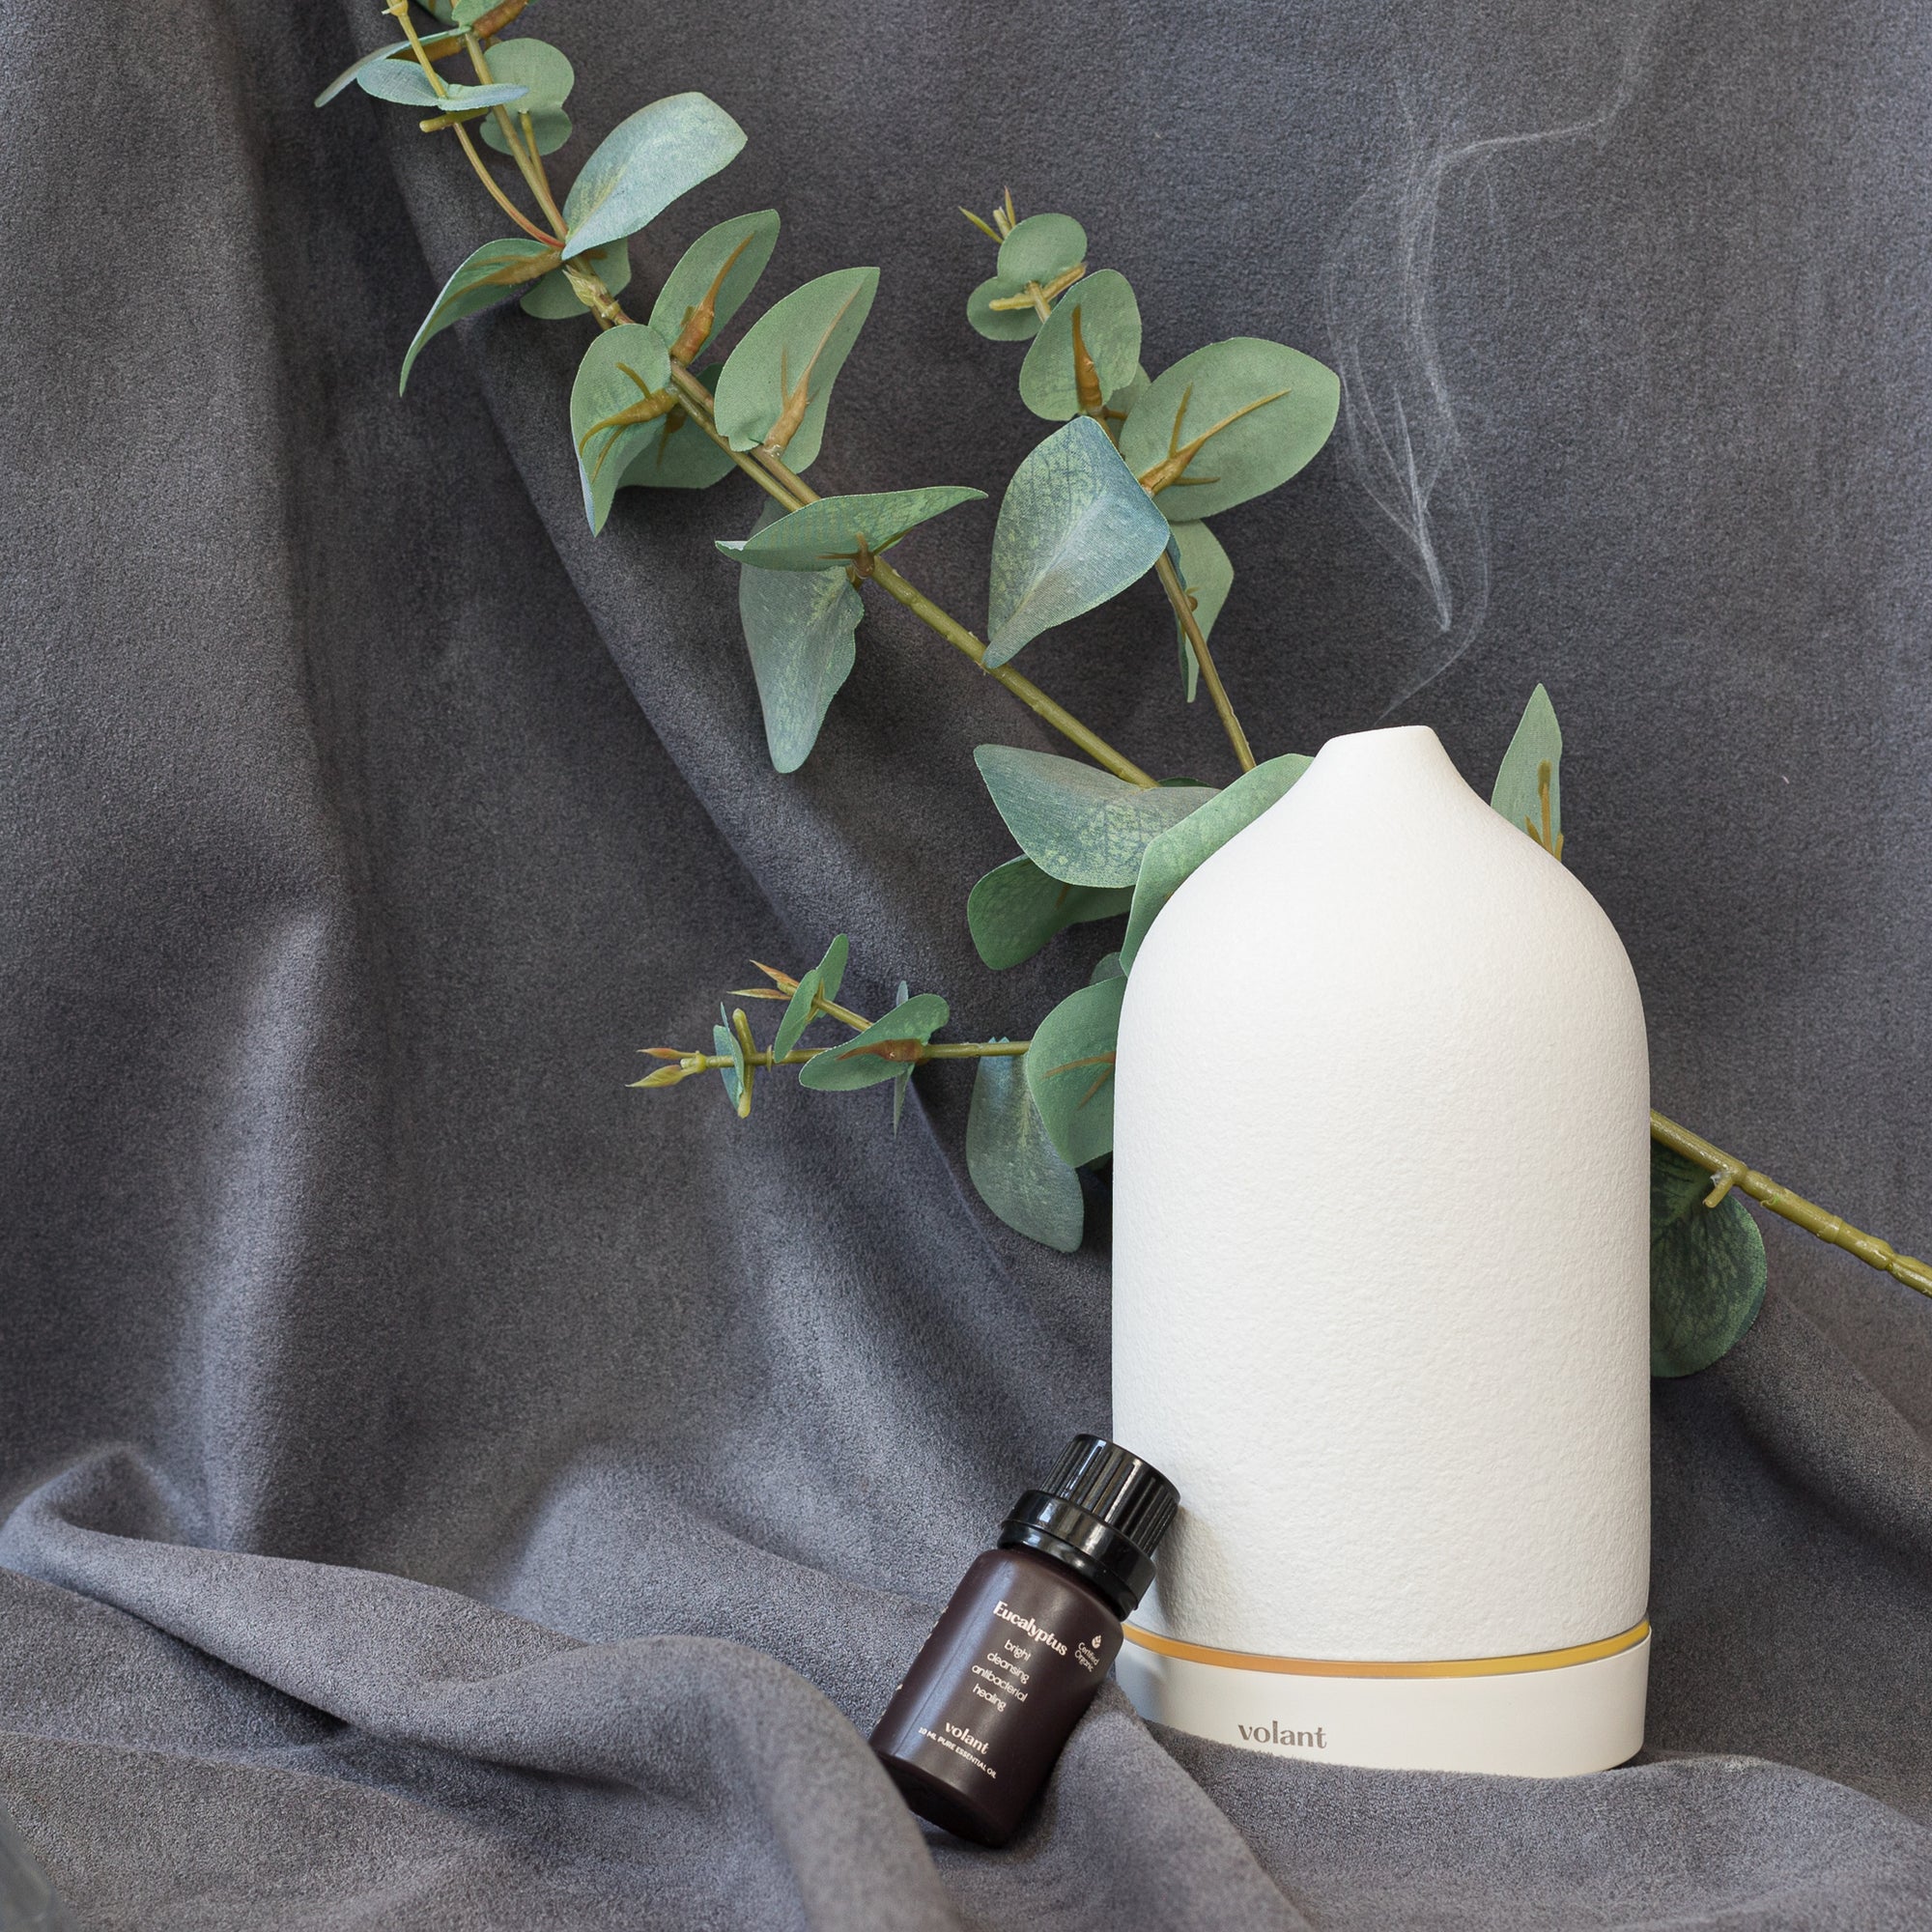 volant white diffuser using organic eucalyptus essential oil to relieve nasal congestion